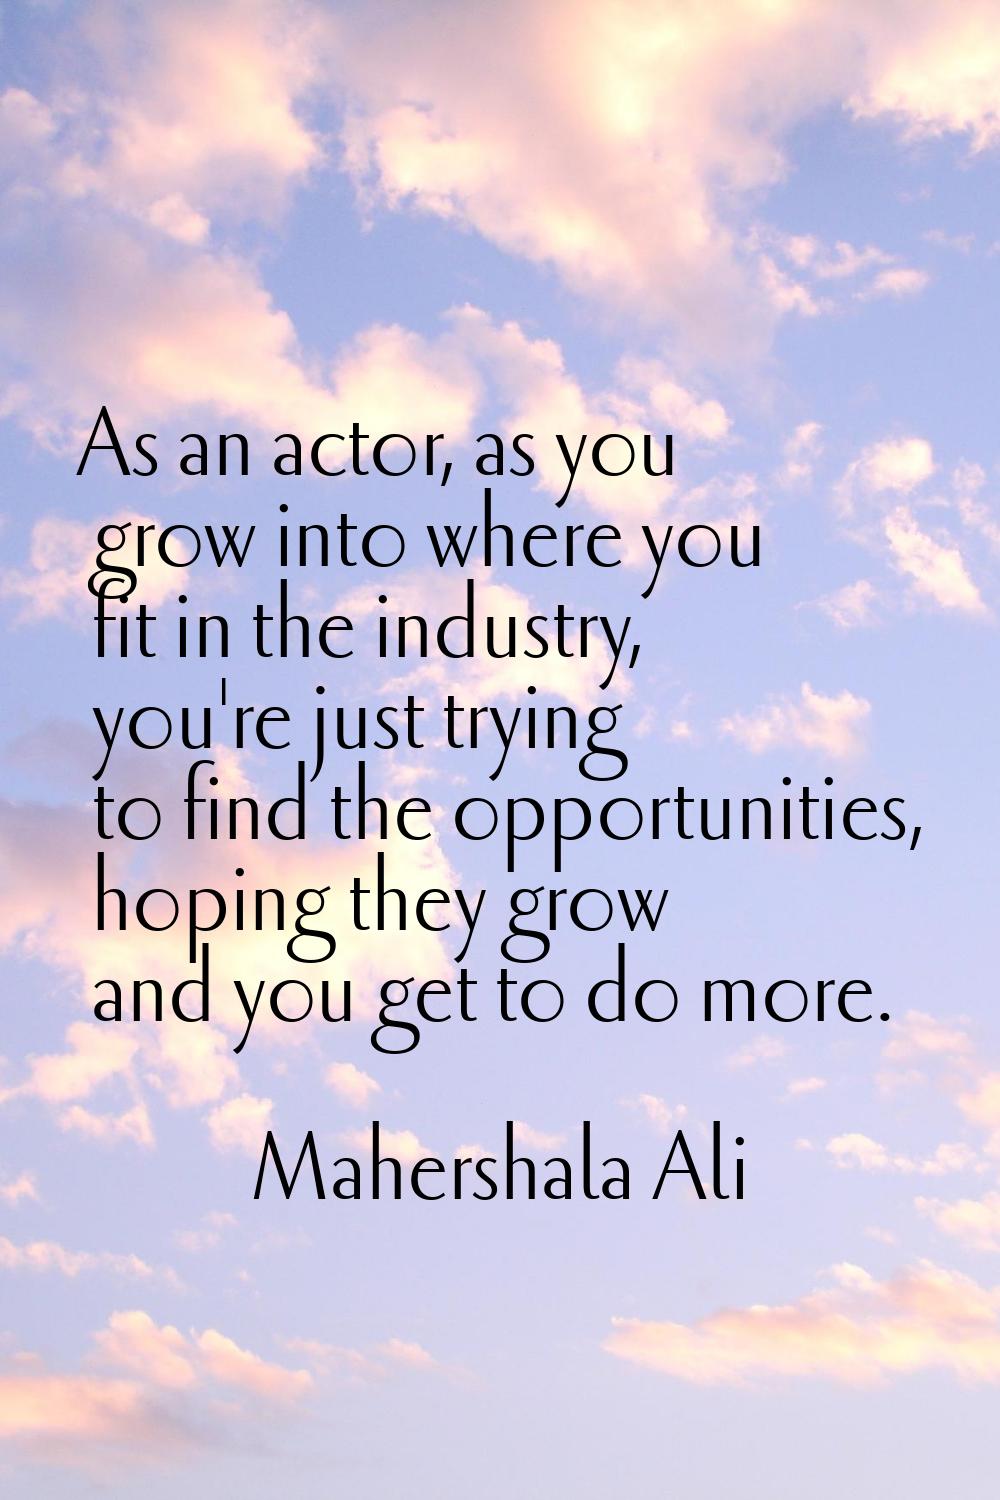 As an actor, as you grow into where you fit in the industry, you're just trying to find the opportu